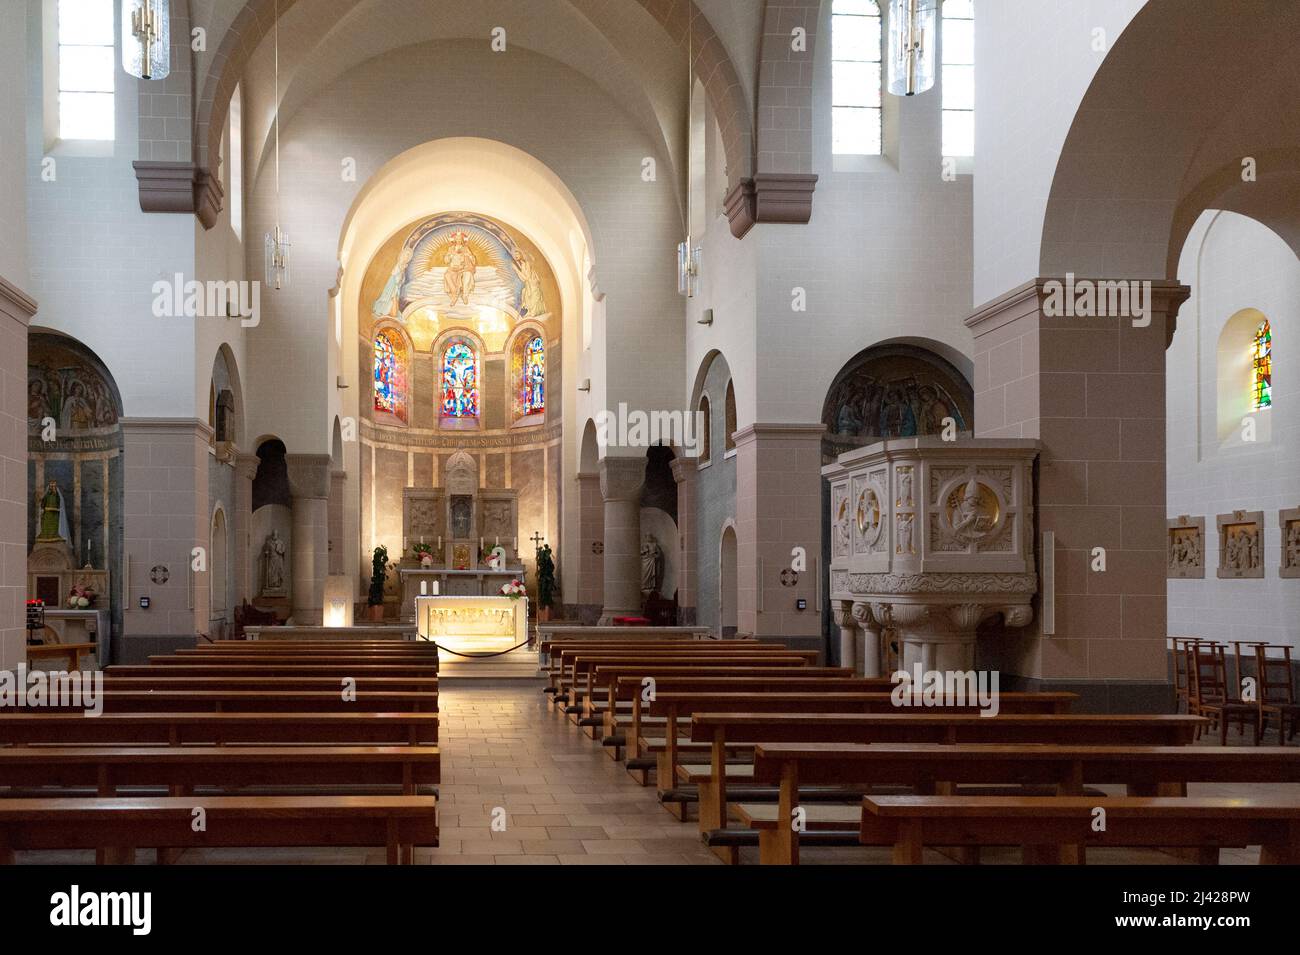 Interior view of the Parish Church of Clervaux, Clervaux, Luxembourg. Stock Photo